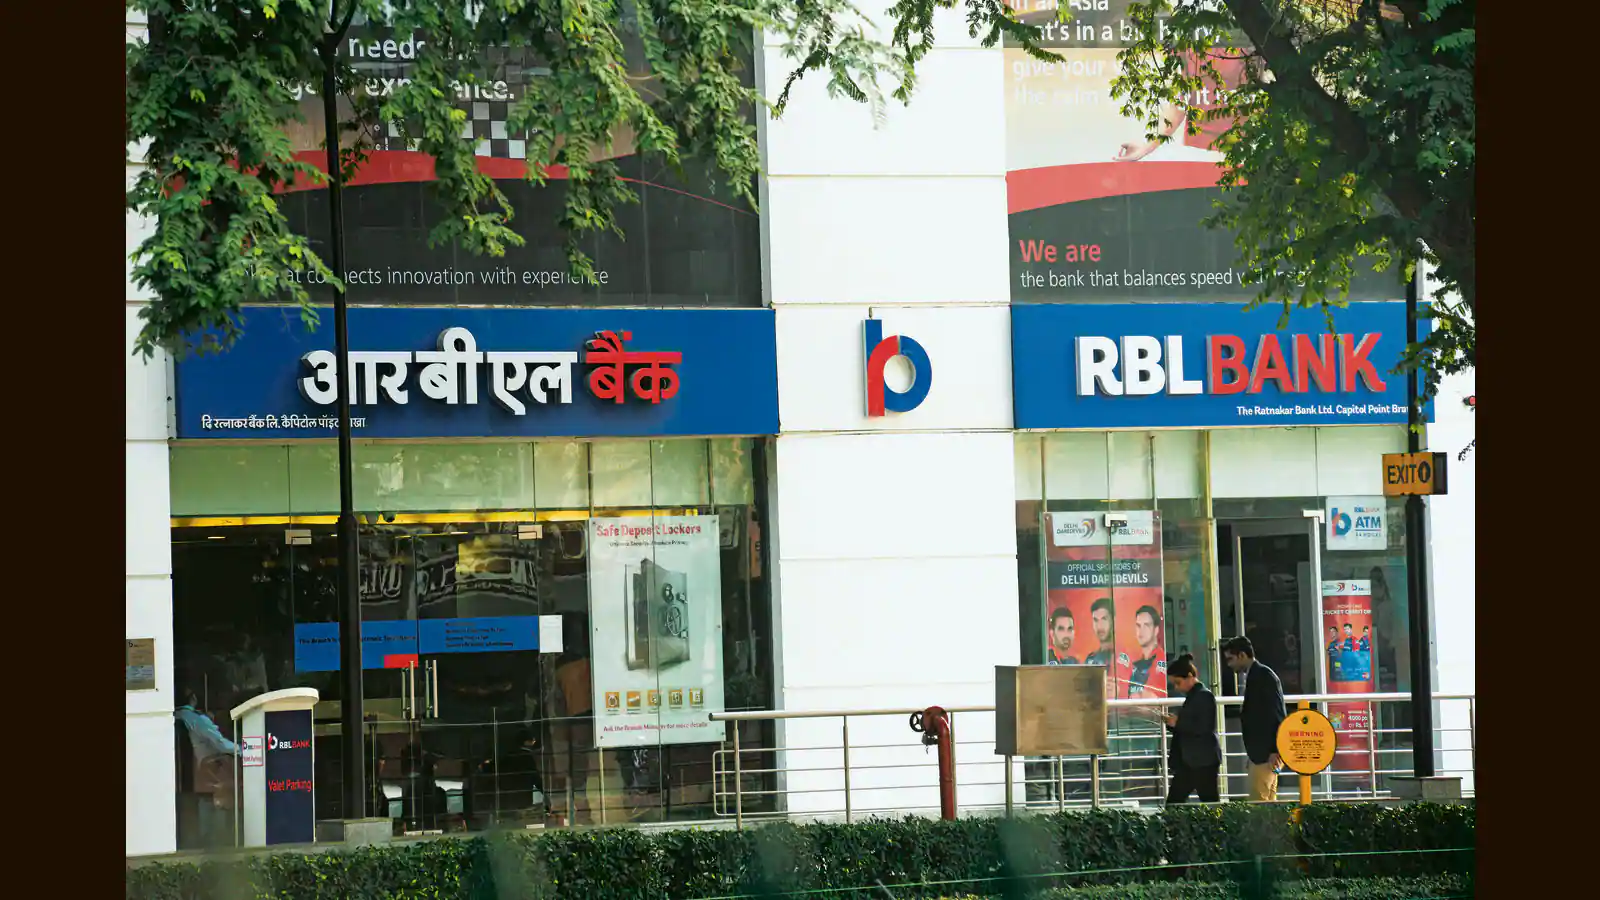 RBL Bank and BookMyShow announce partnership to launch Play credit card